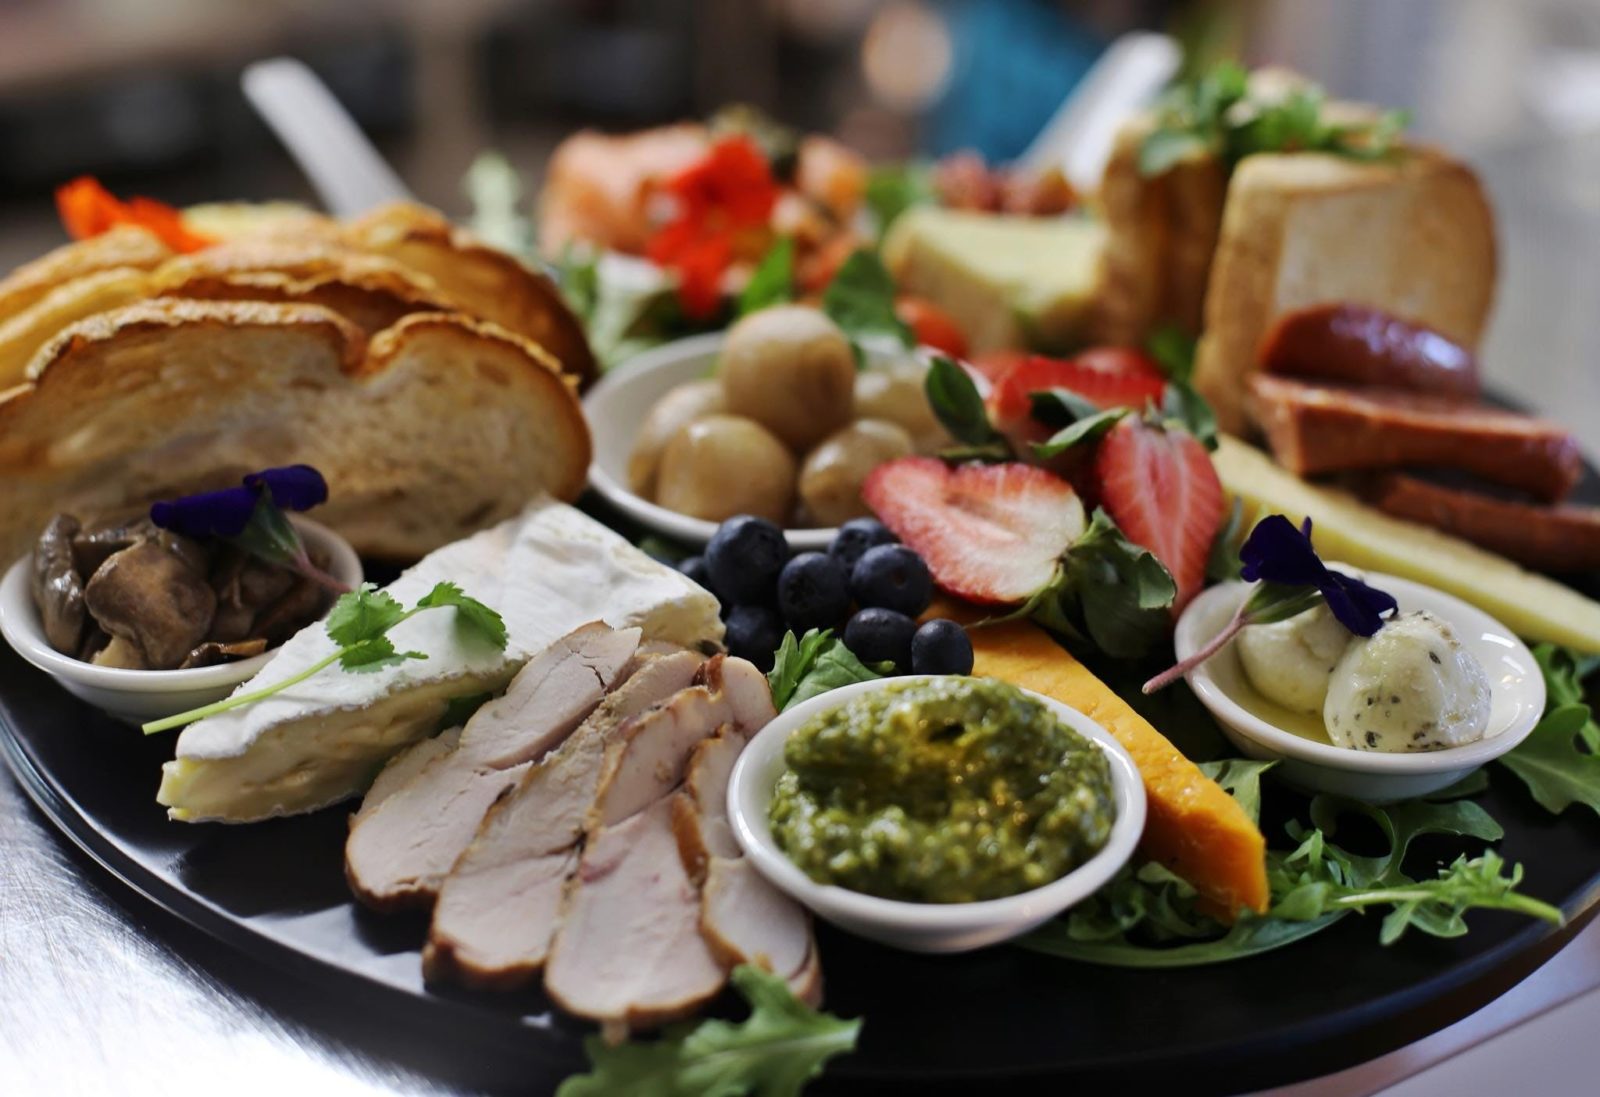 platter of fresh local cheeses, charcuterie, seafoods, fruits and our Tassie pickled onions.